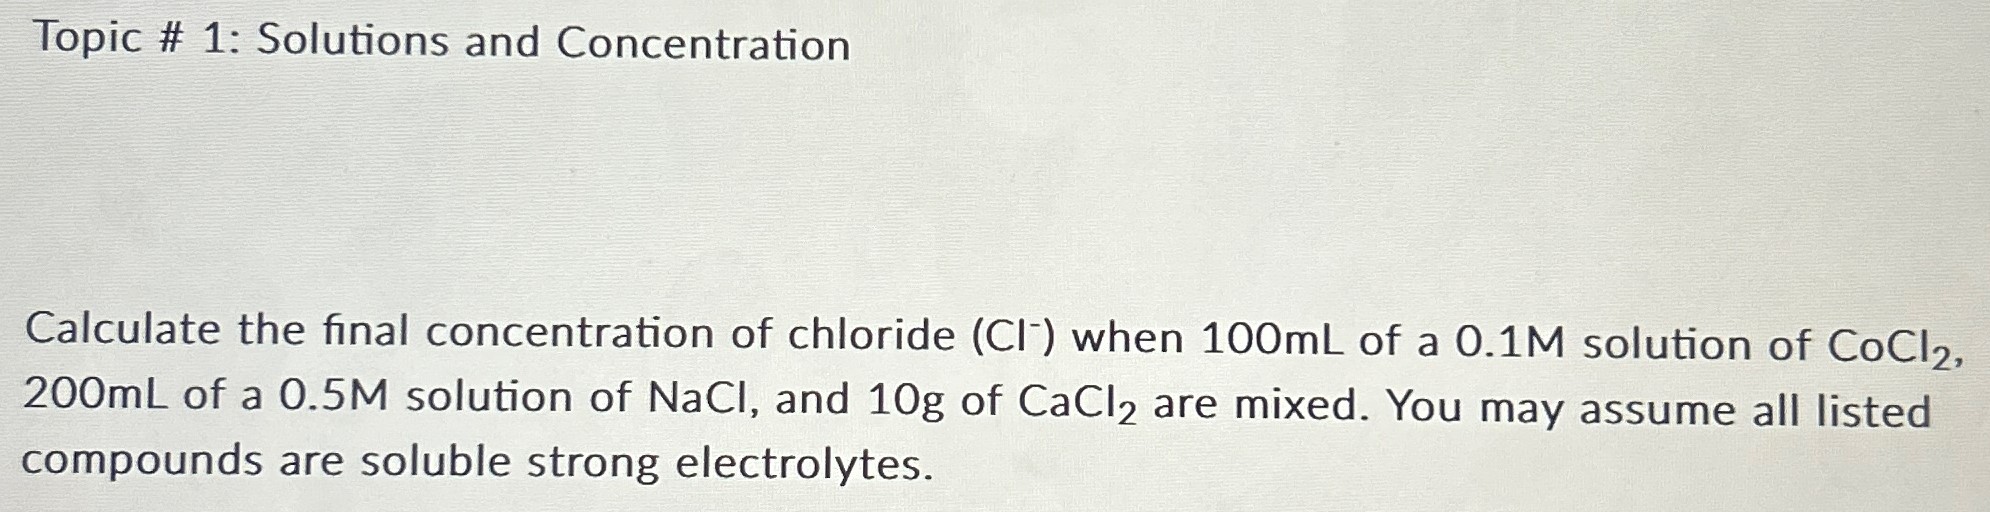 Topic # 1: Solutions and Concentration Calculate the final concentration of chloride (Cl−)when 100 mL of a 0.1 M solution of CoCl2, 200 mL of a 0.5 M solution of NaCl, and 10 g of CaCl2 are mixed. You may assume all listed compounds are soluble strong electrolytes.